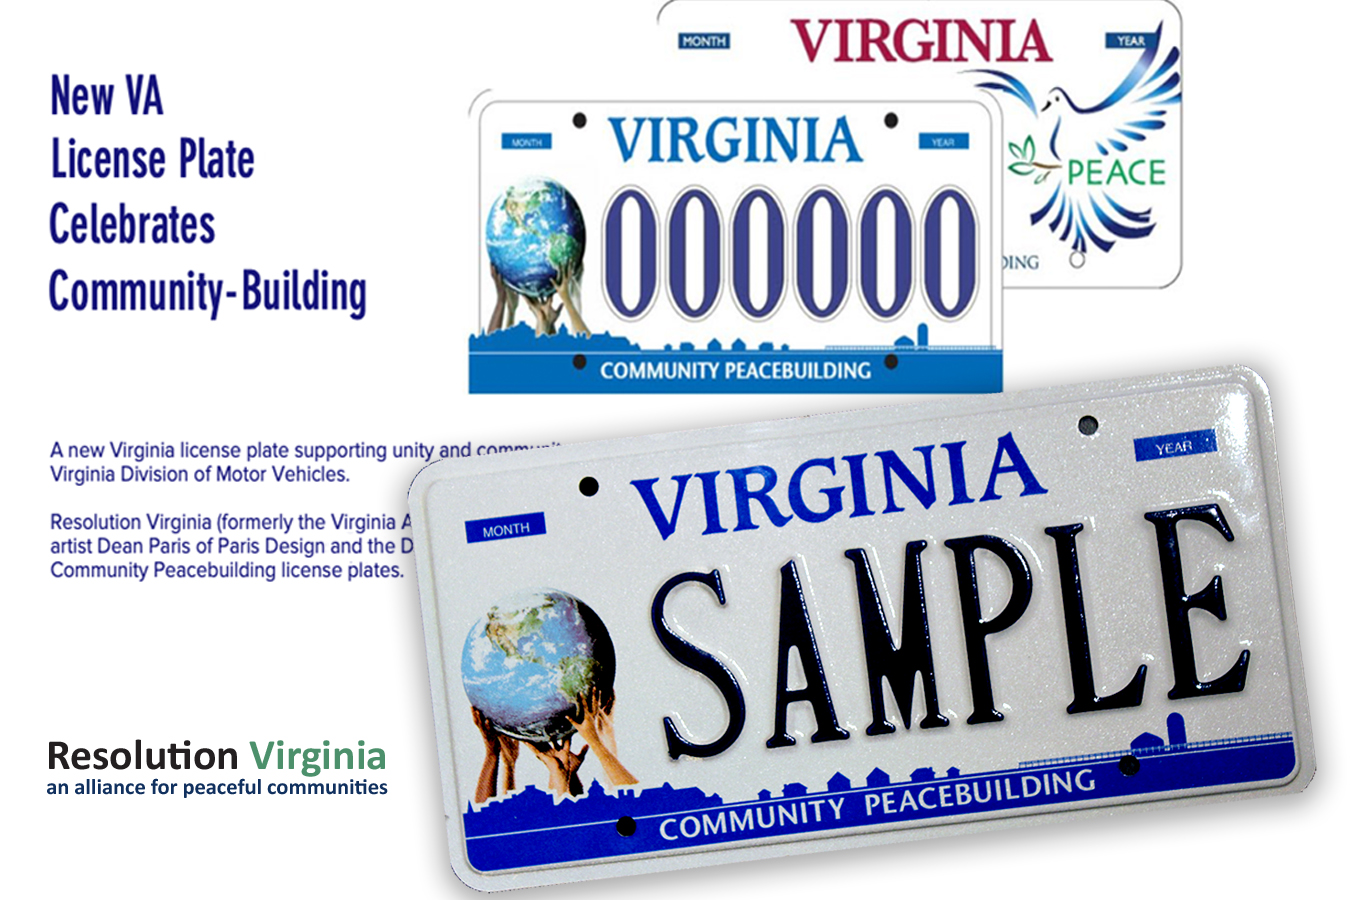 VA Licensce : Vanity License Plate for Community Peace Building available in Virginia